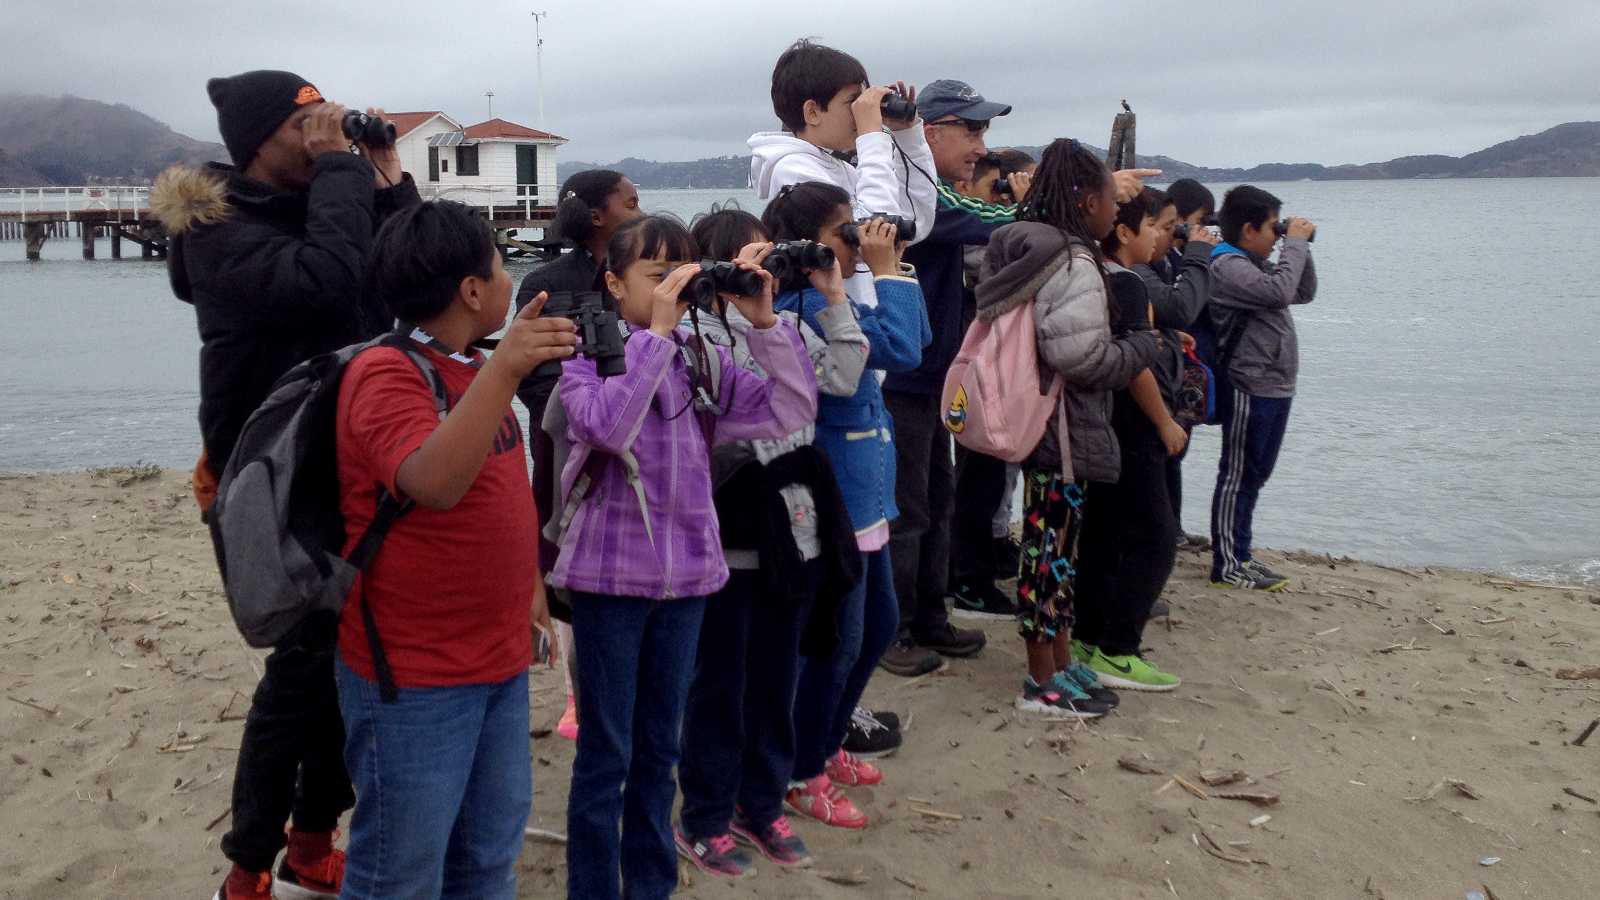 group of students birdwatching on the beach